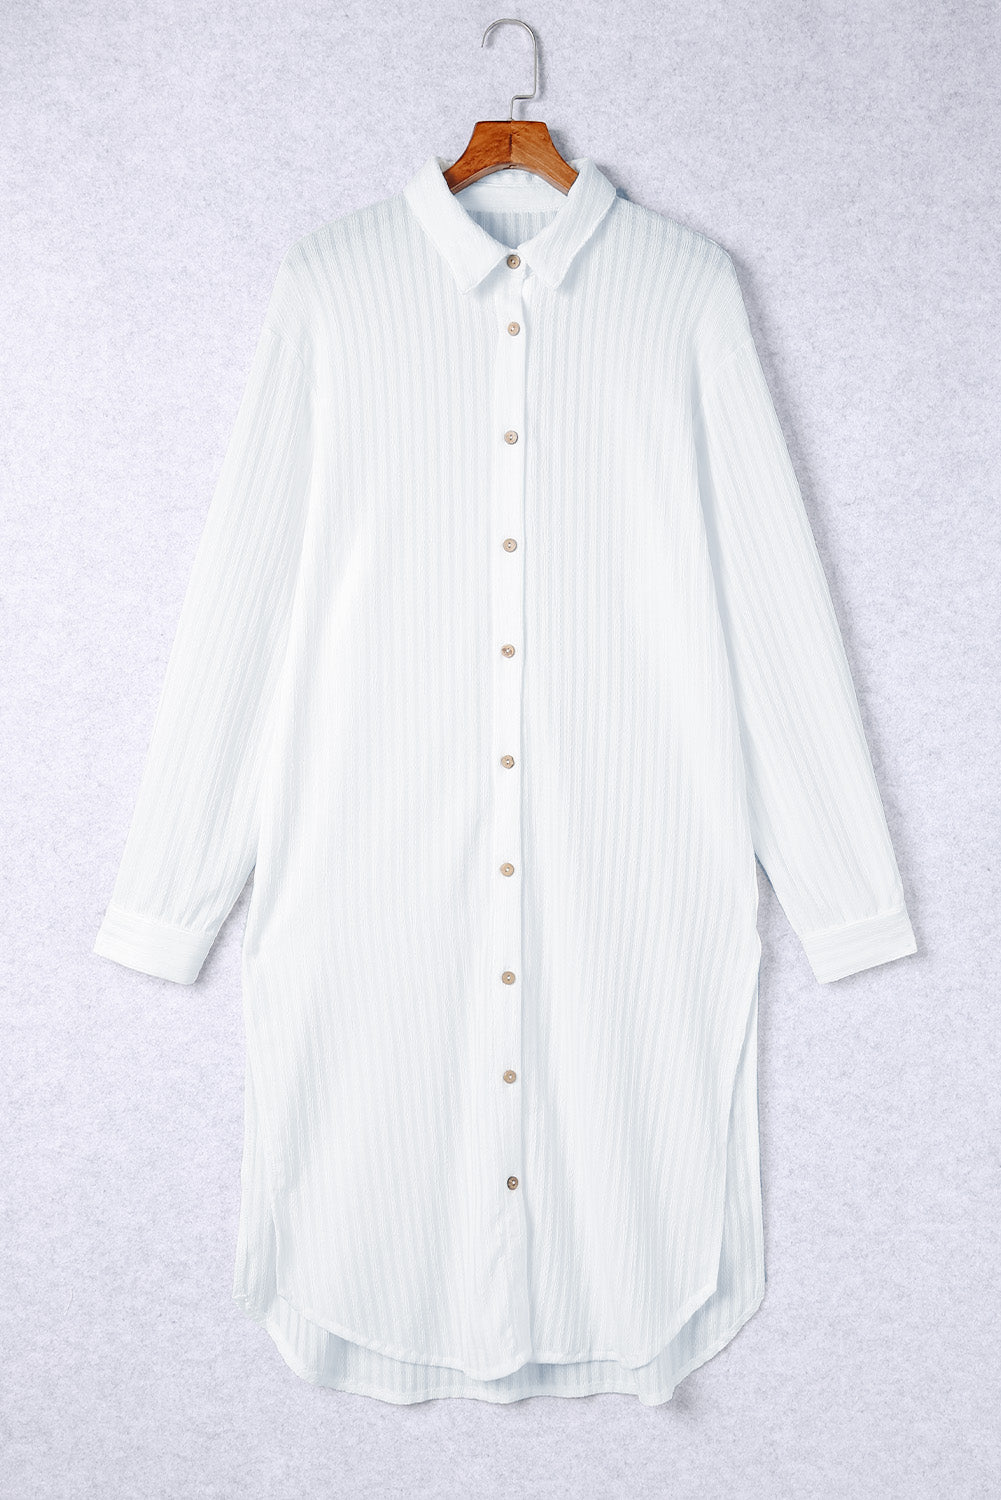 White Striped Button Up Long Sleeve Swimsuit Cover Up